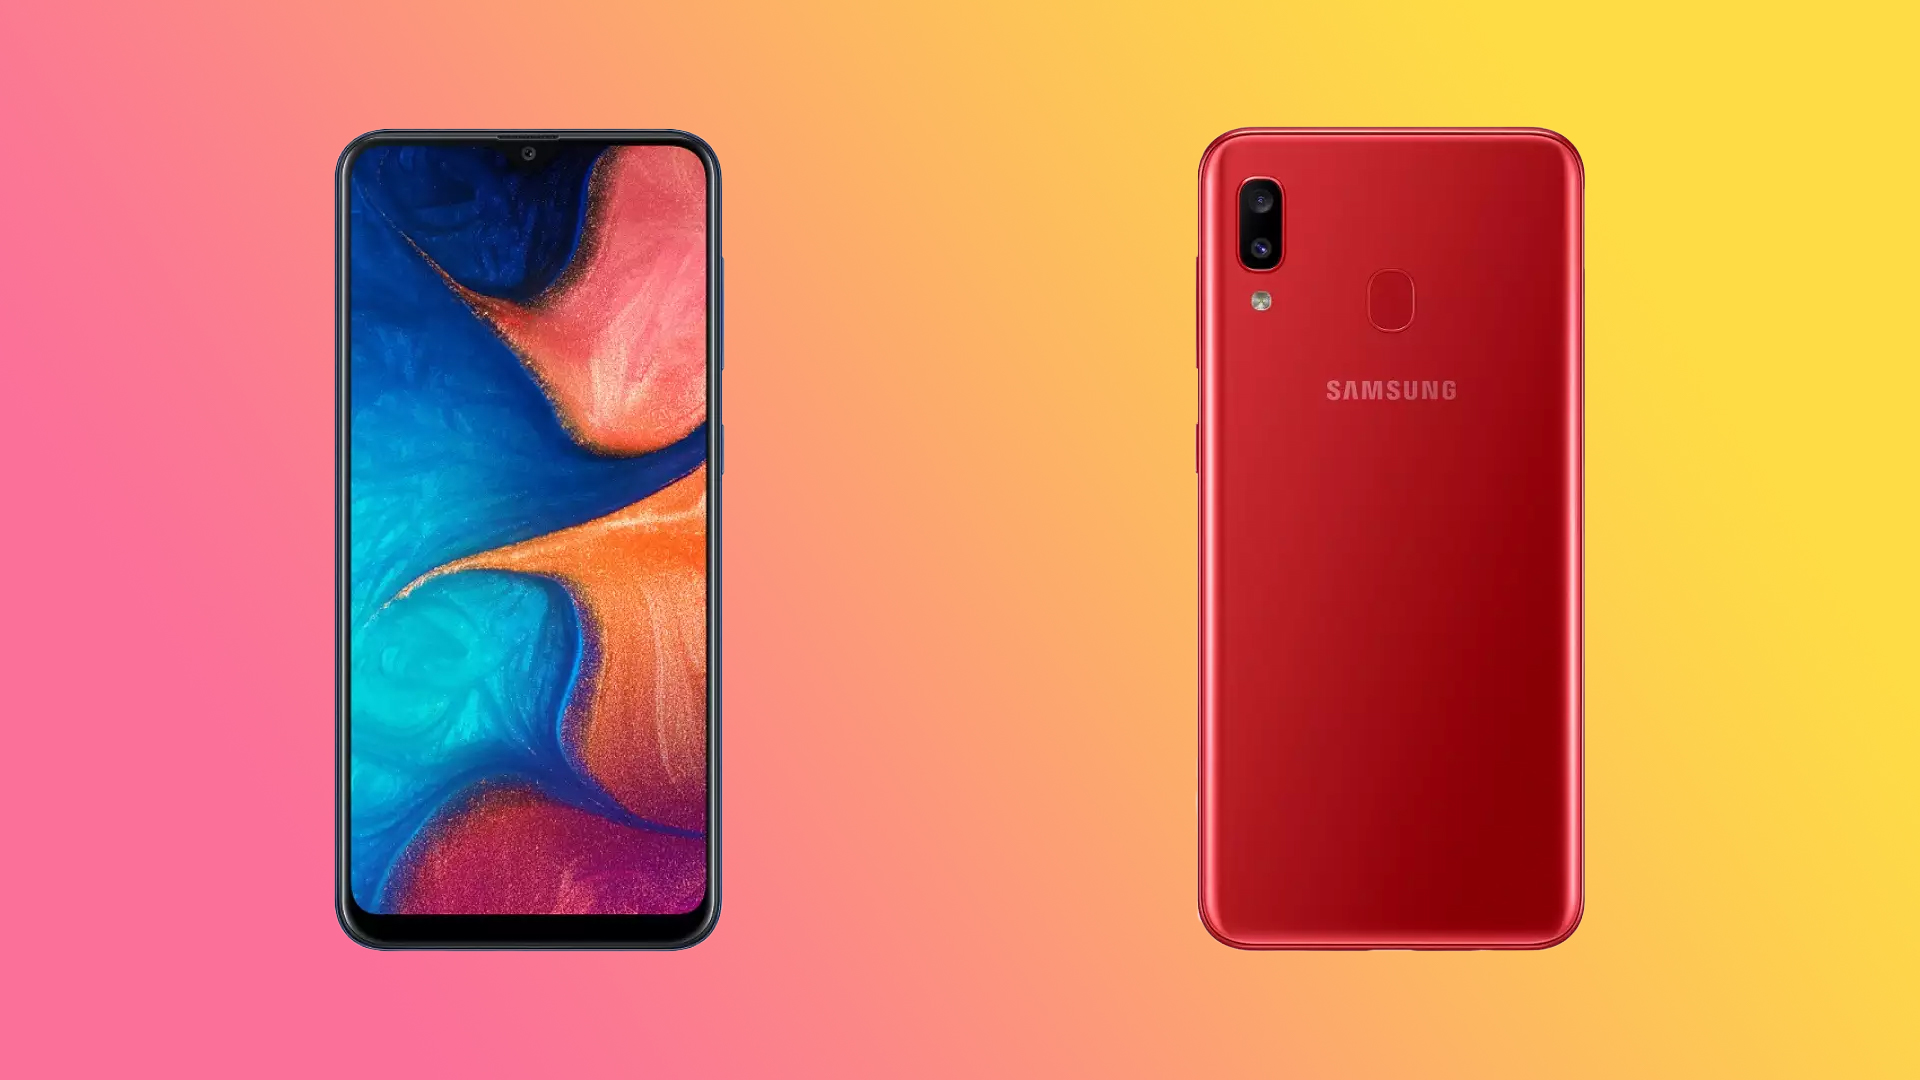 Samsung Galaxy A20 finally gets the Android 11 update - SamMobile